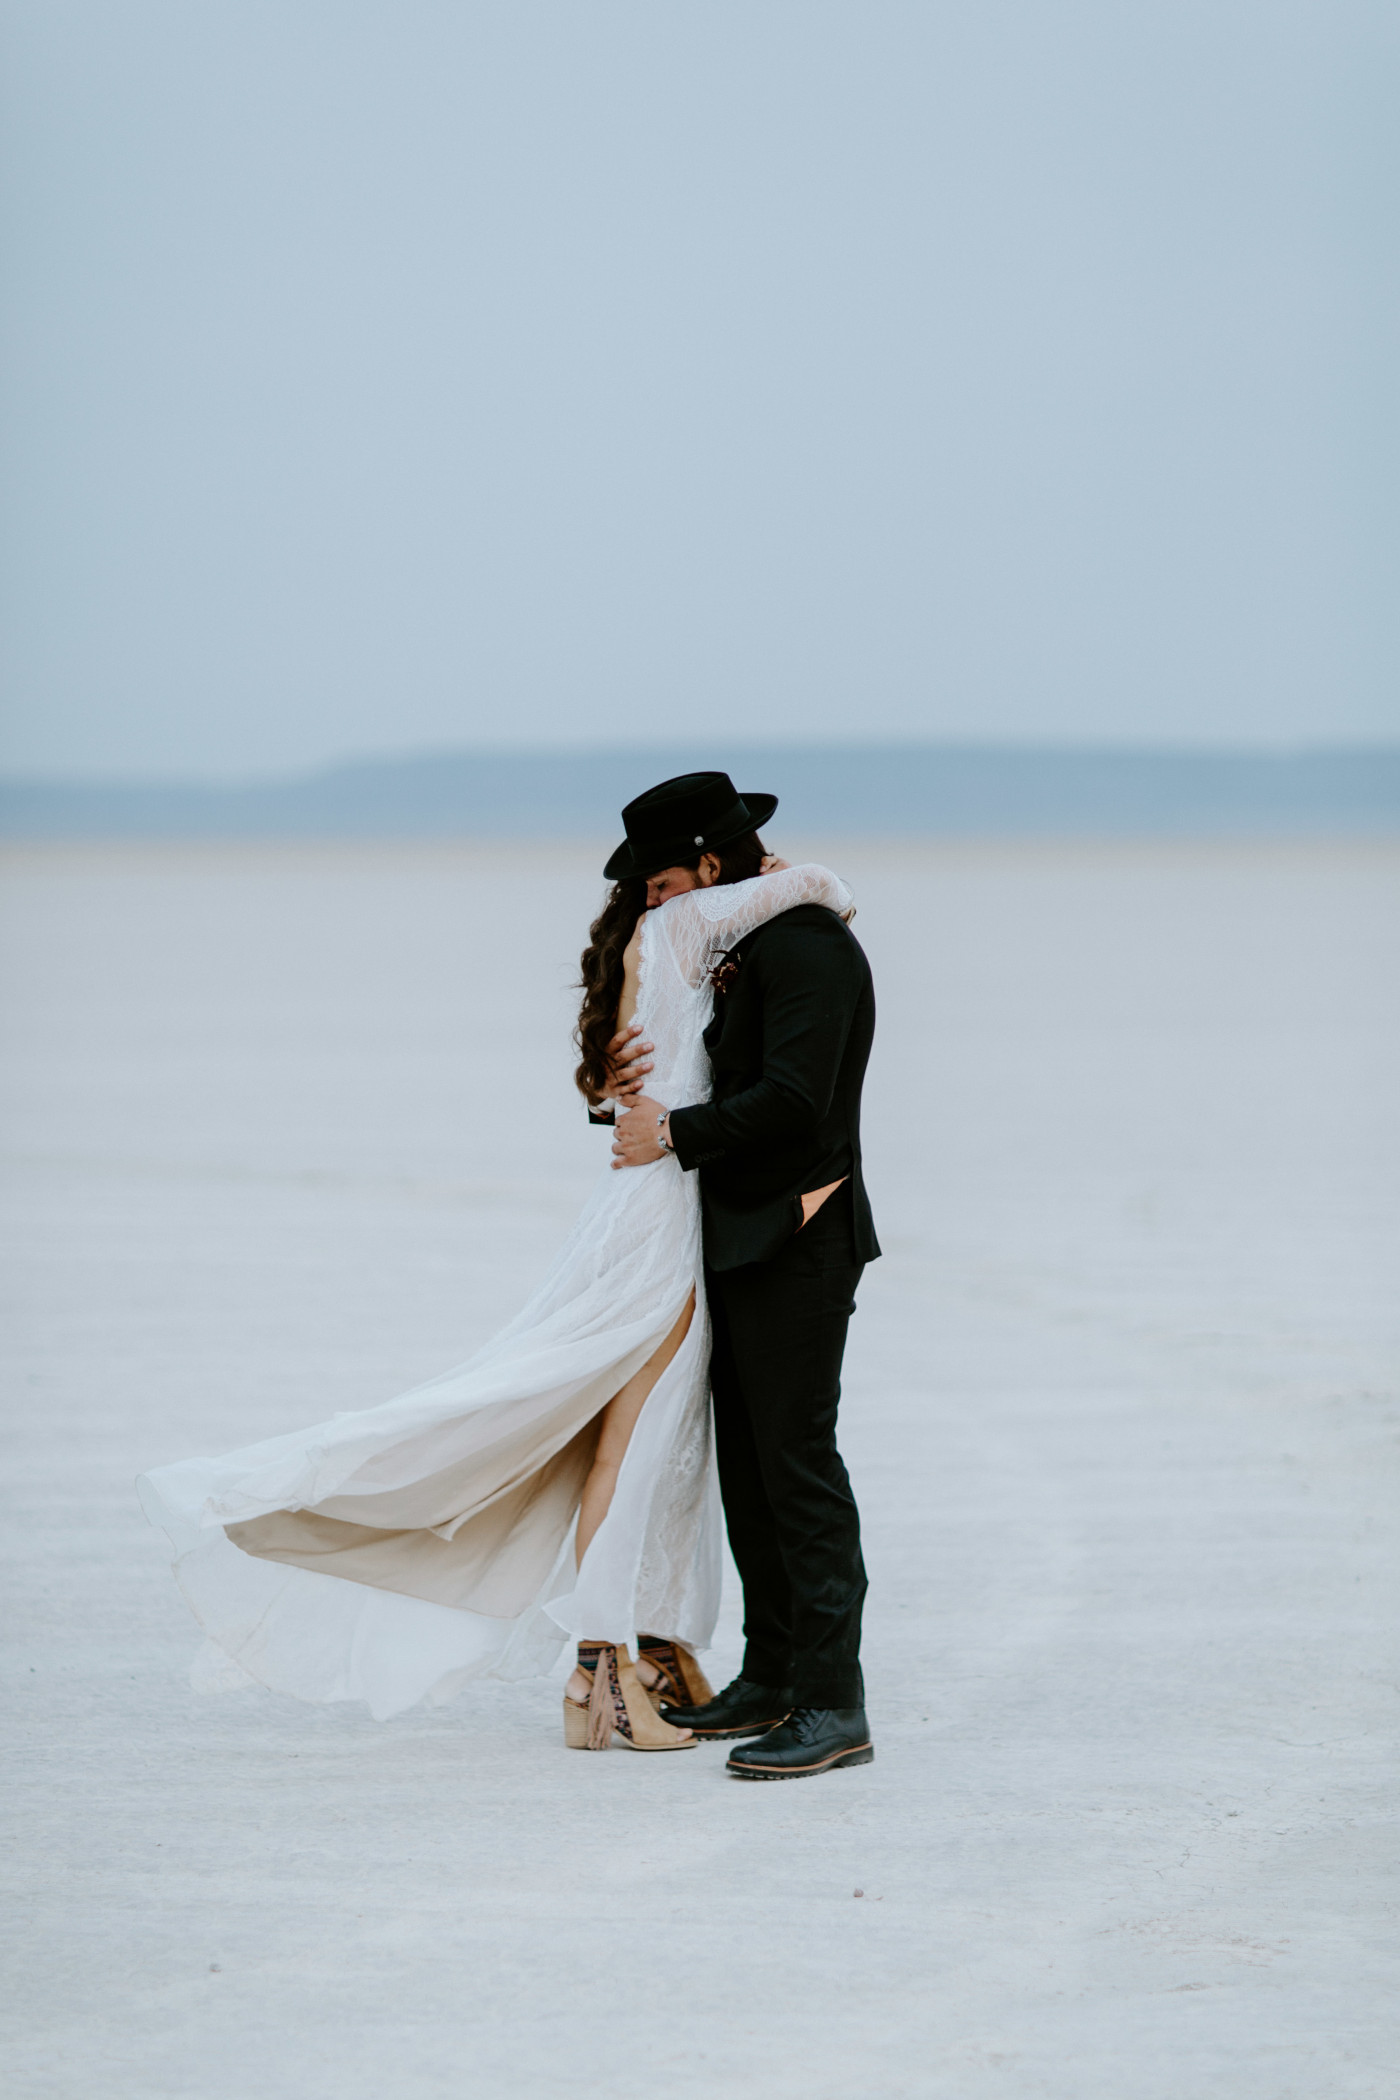 Cameron and Emerald hug during their first look at the playa in the Alvord Desert.